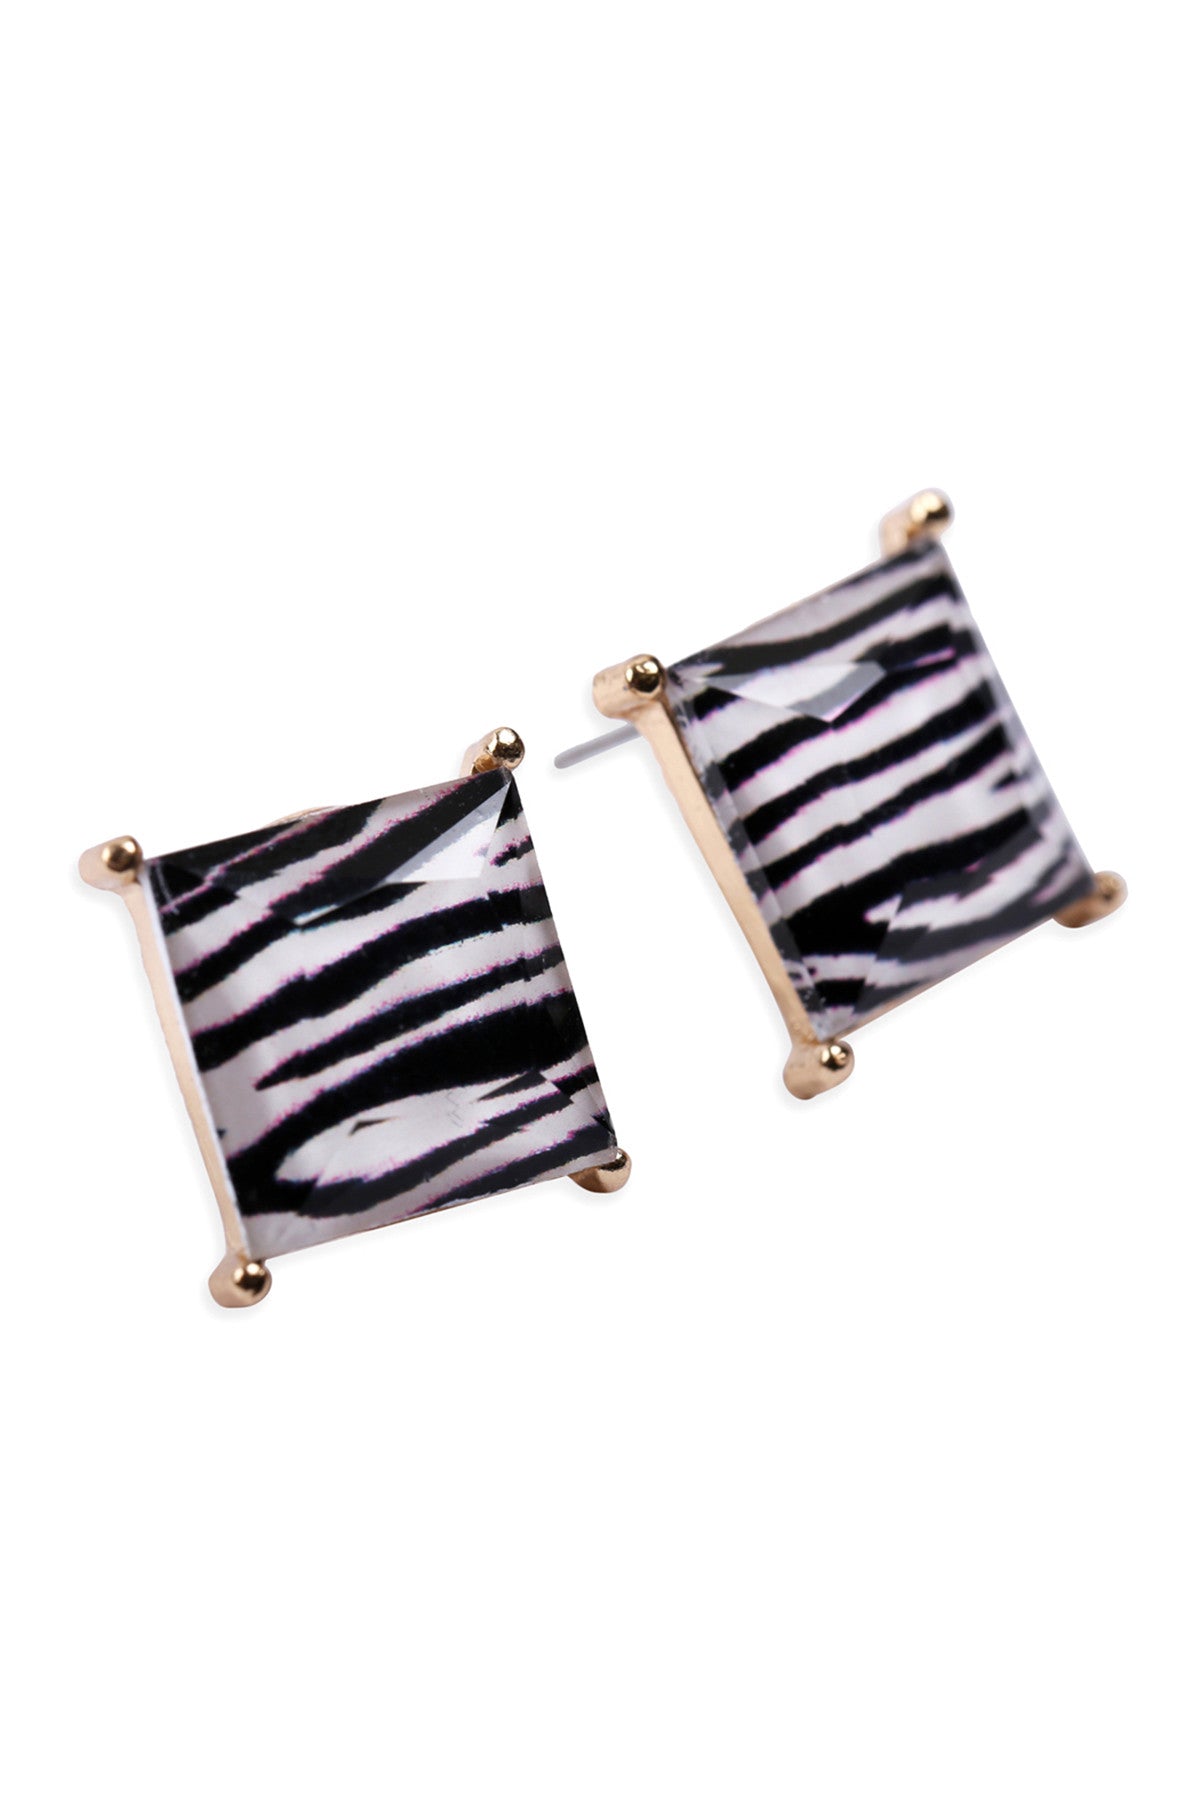 FACETED SQUARE ACRYLIC POST EARRINGS/6PAIRS (NOW $0.75 ONLY!)